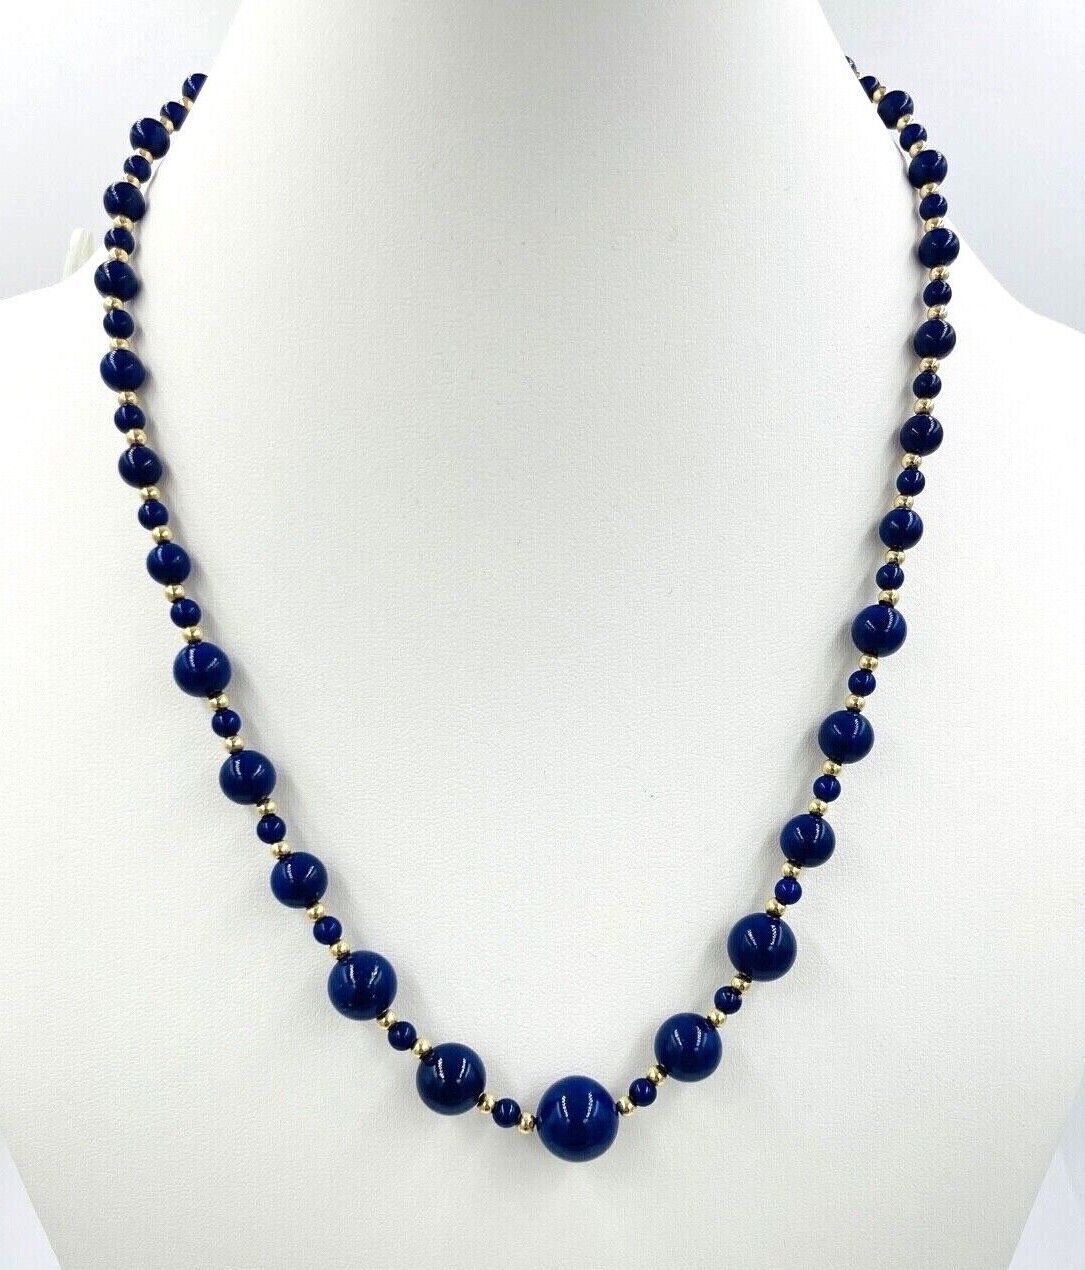 Buy Wonderful Ancient Afghanistan Lapis Lazuli Stone Big Beads Necklace  Online in India - Etsy